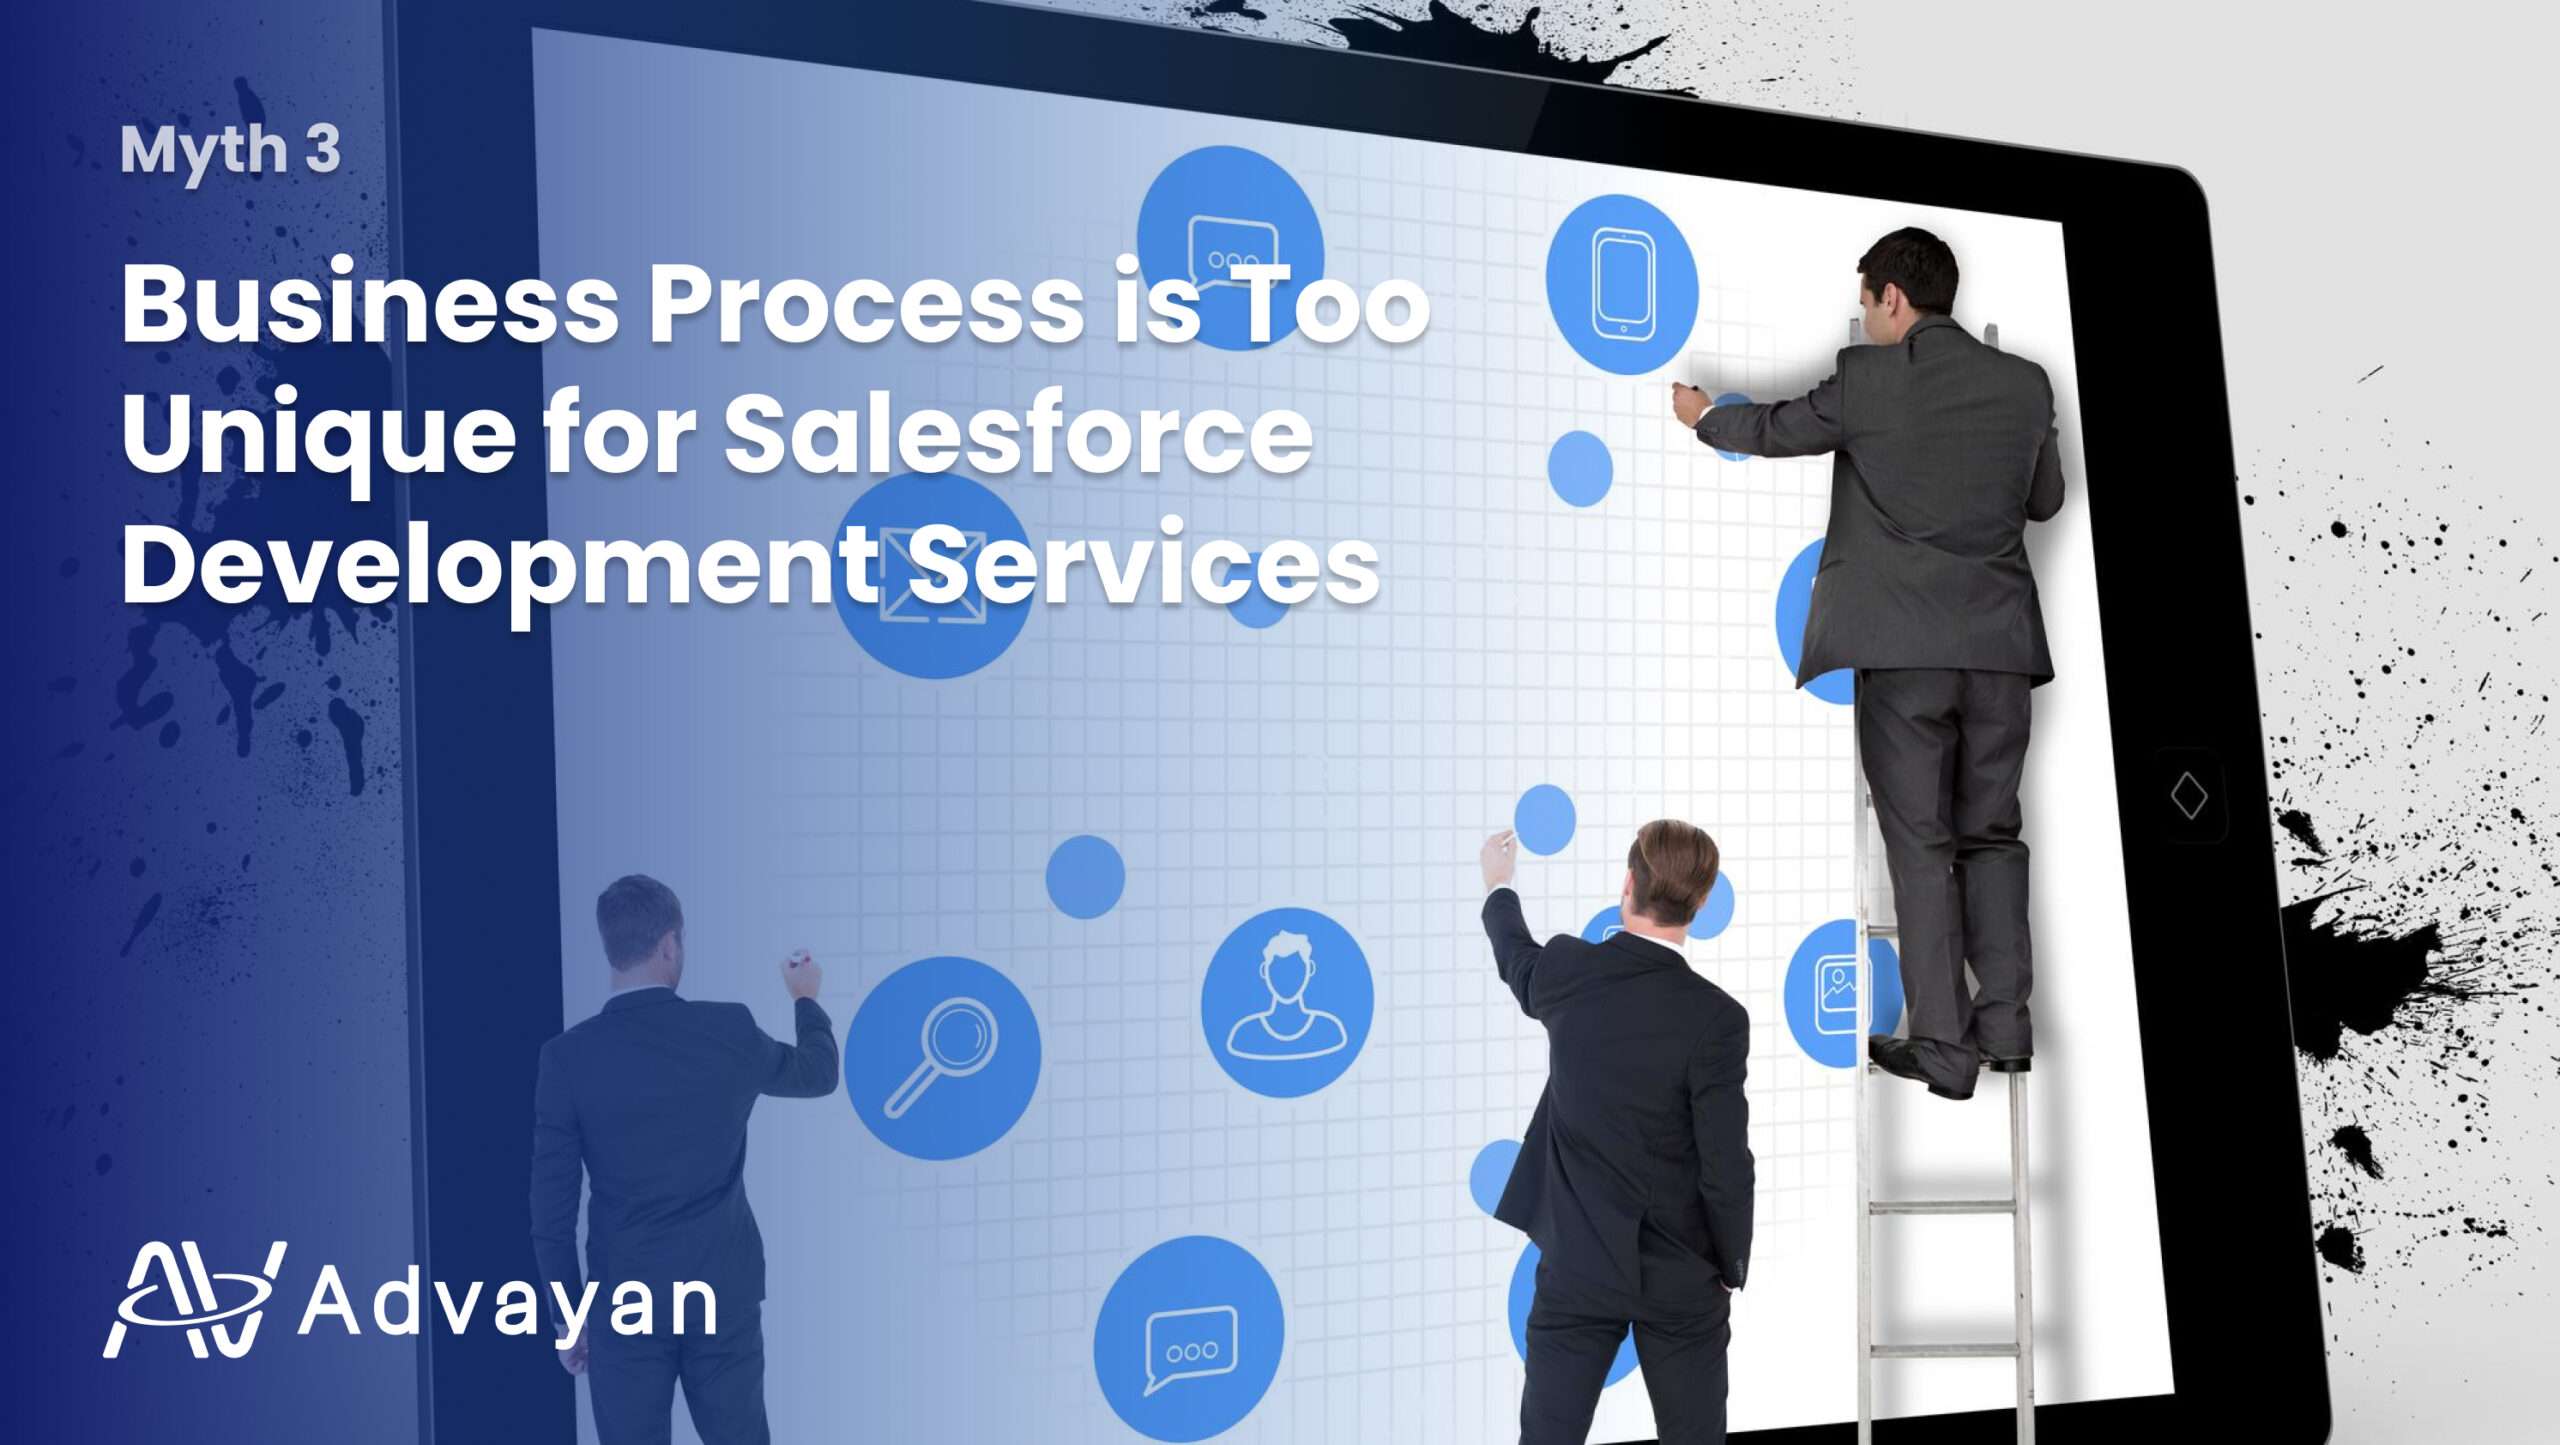 Myth 3 Business Process is Too Unique for Salesforce Development Services